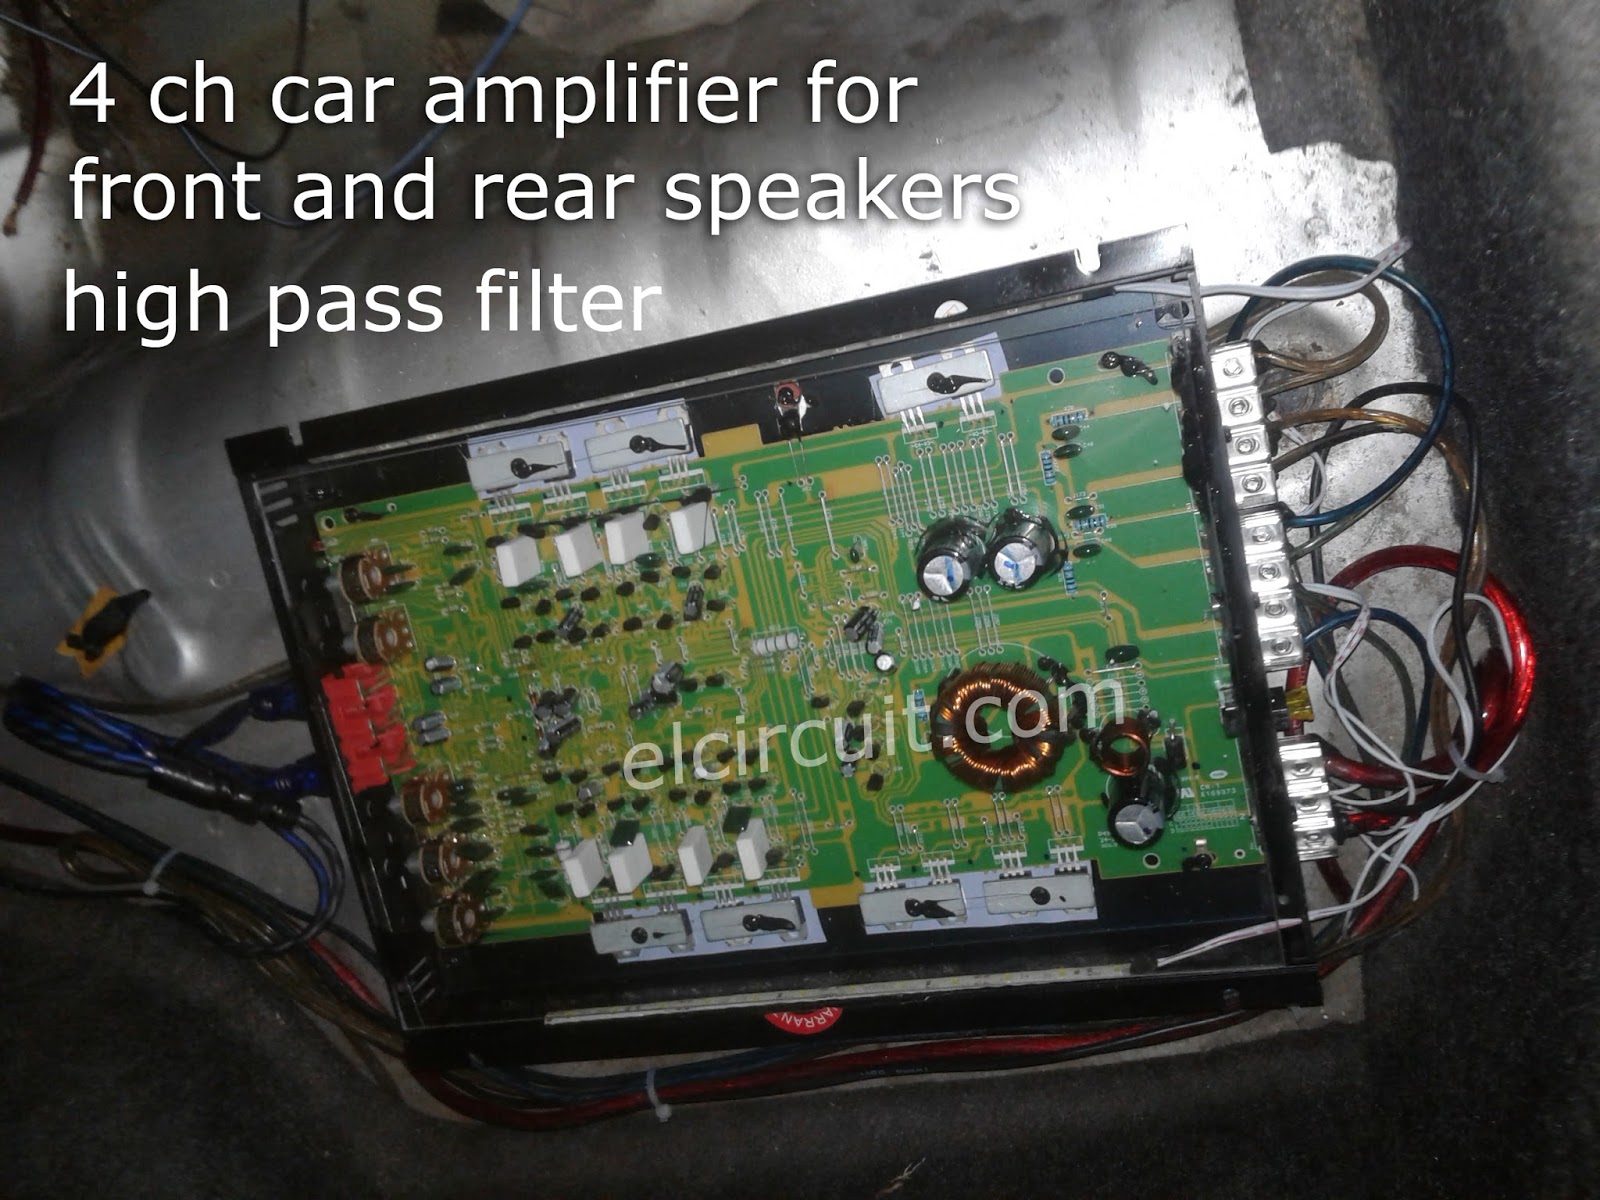 Best car audio setup for Sound Quality - Electronic Circuit